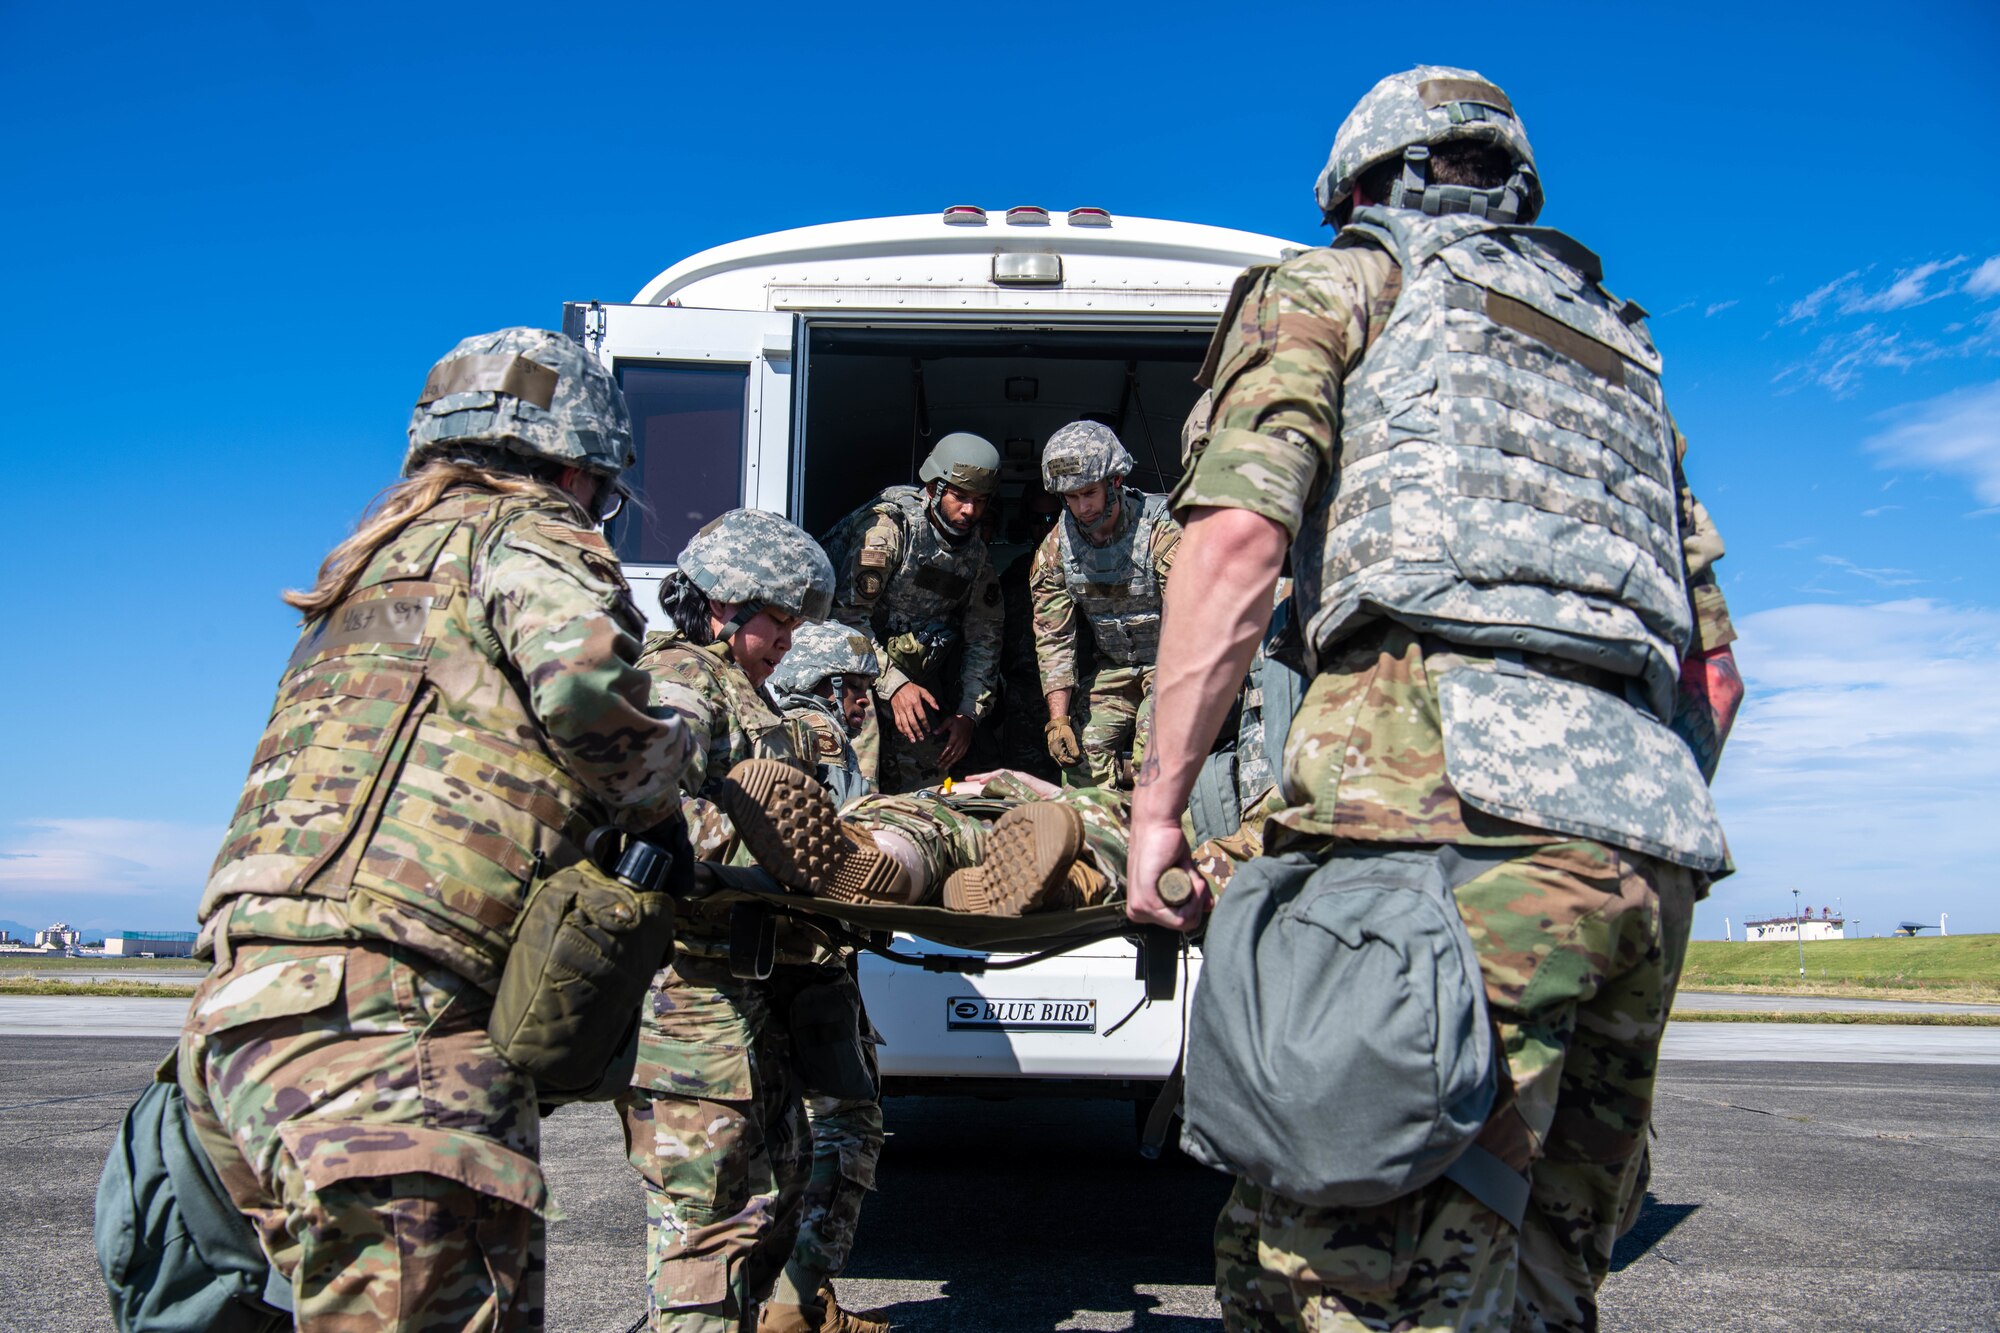 Airmen lift a simulated patient into a medical transport vehicle